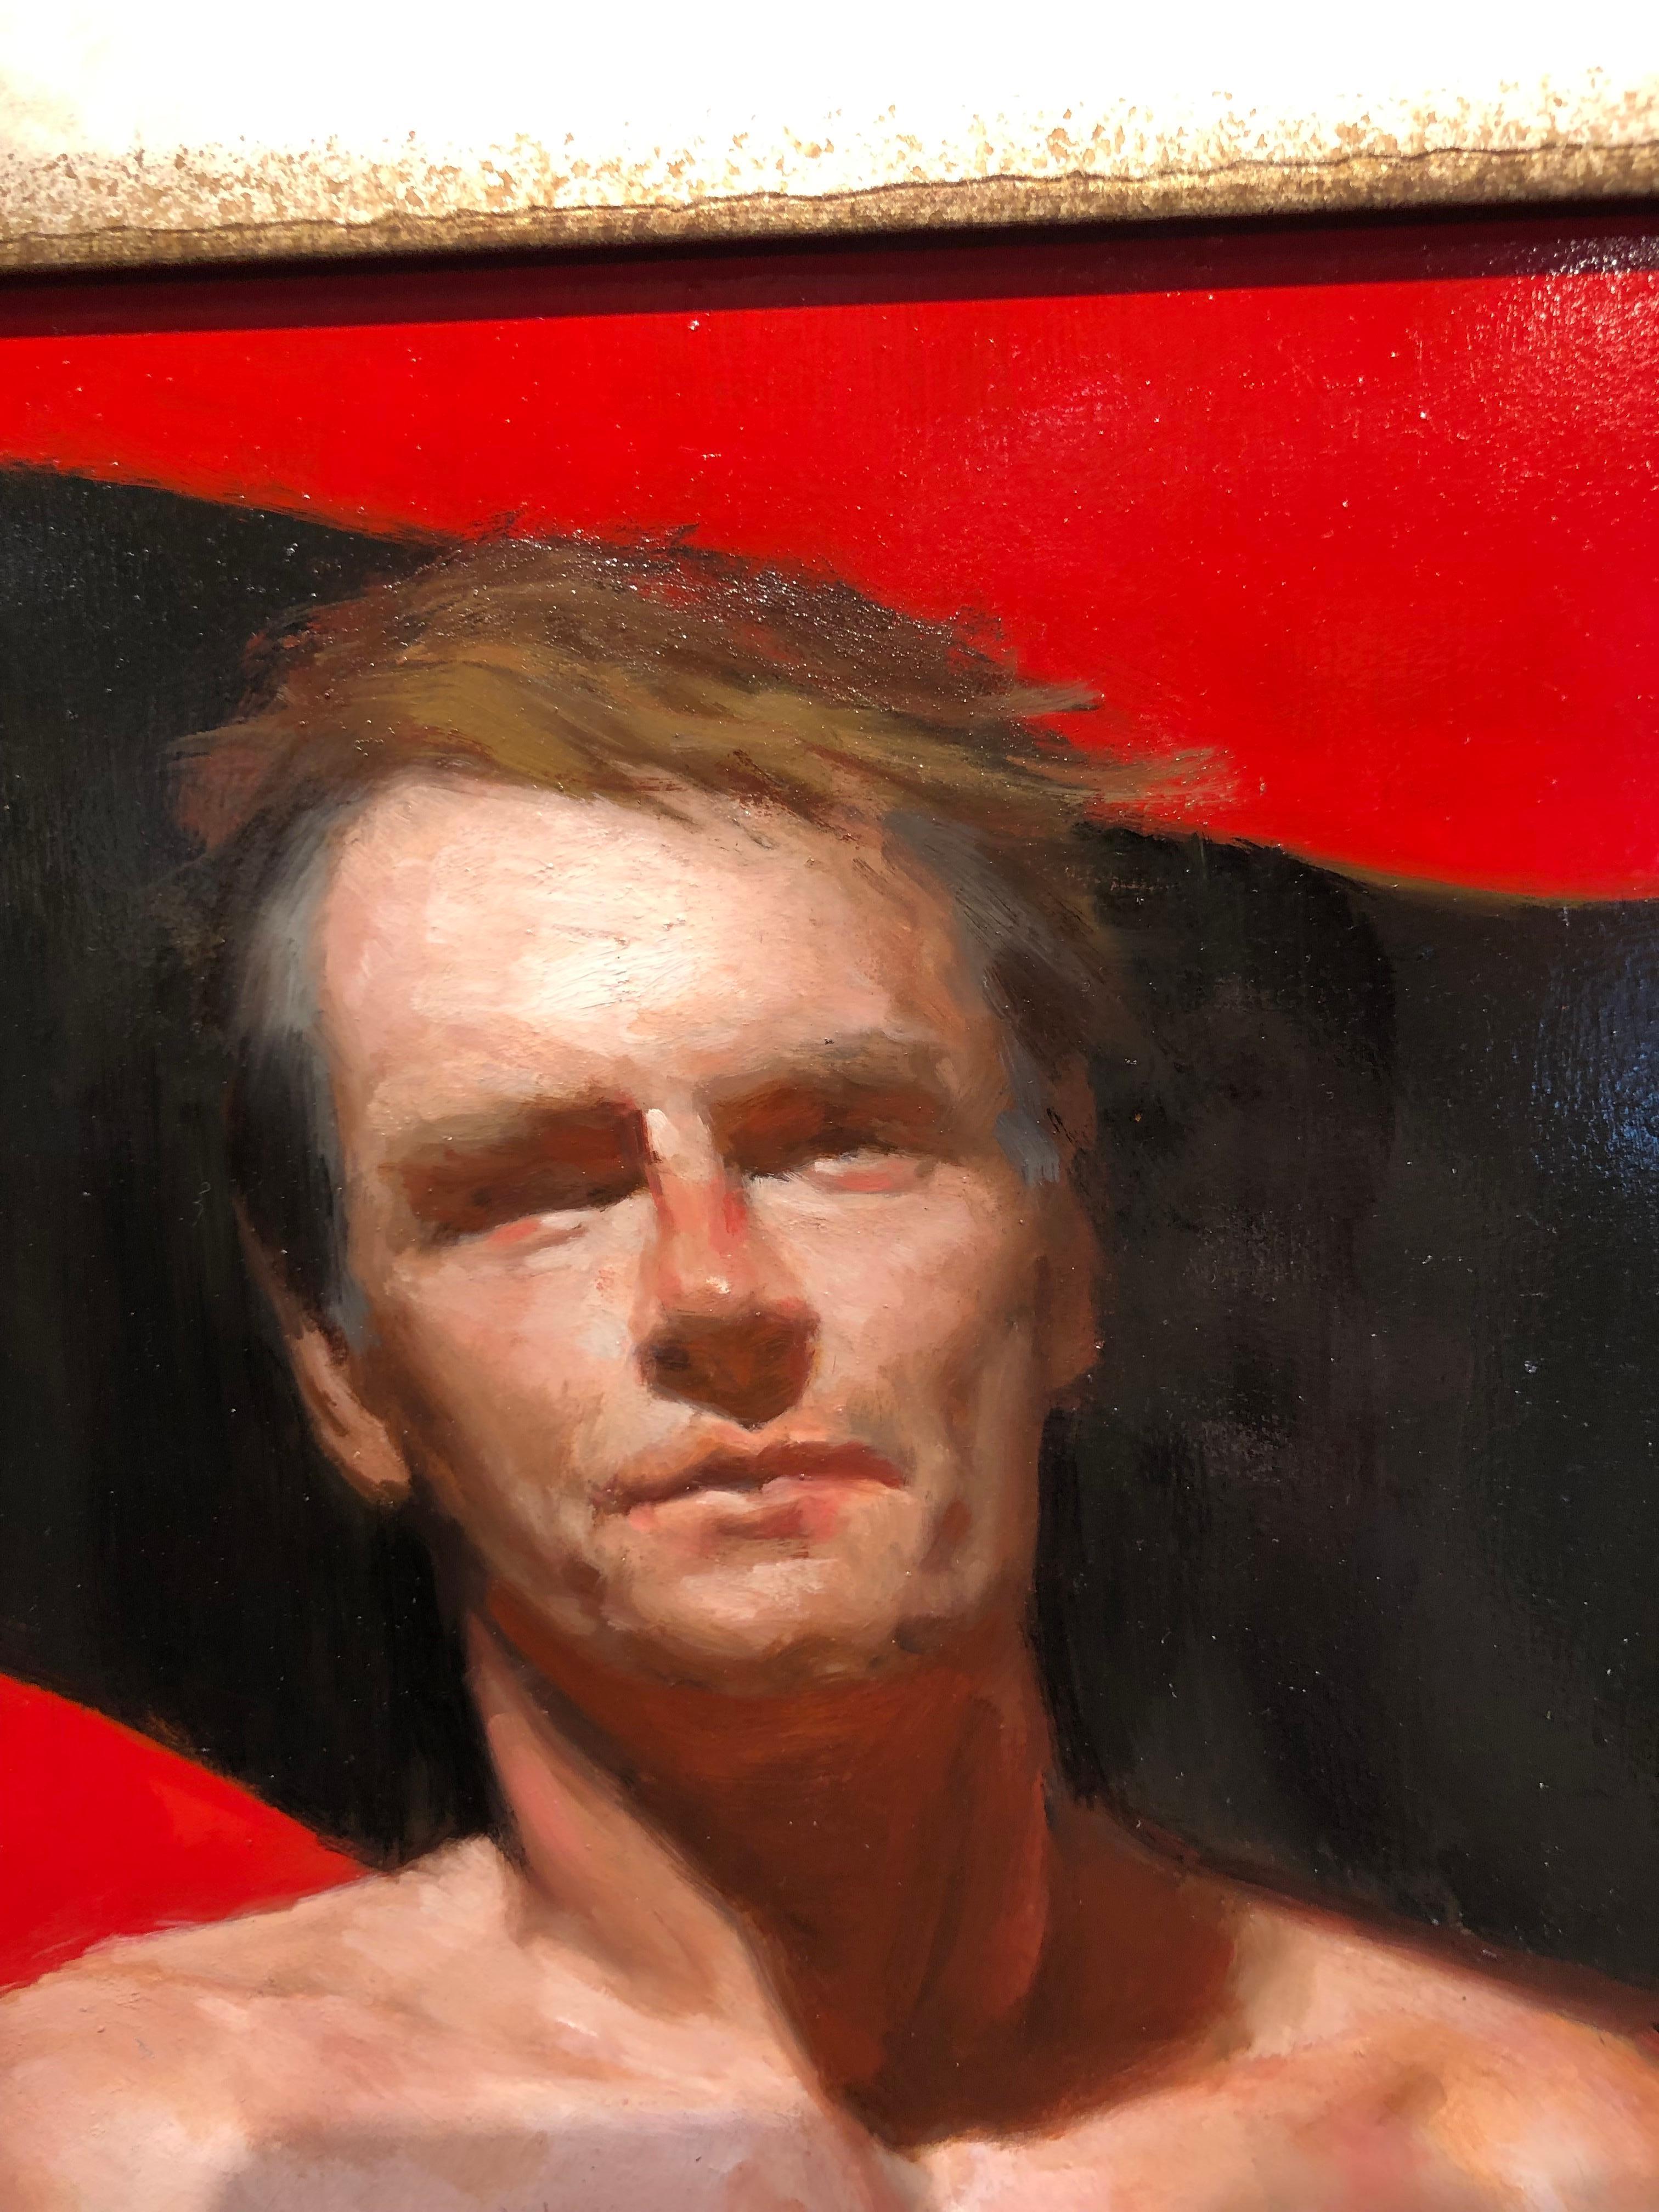 7B - Red Background with Shirtless Male and Black Seven, Oil on Panel Painting 2